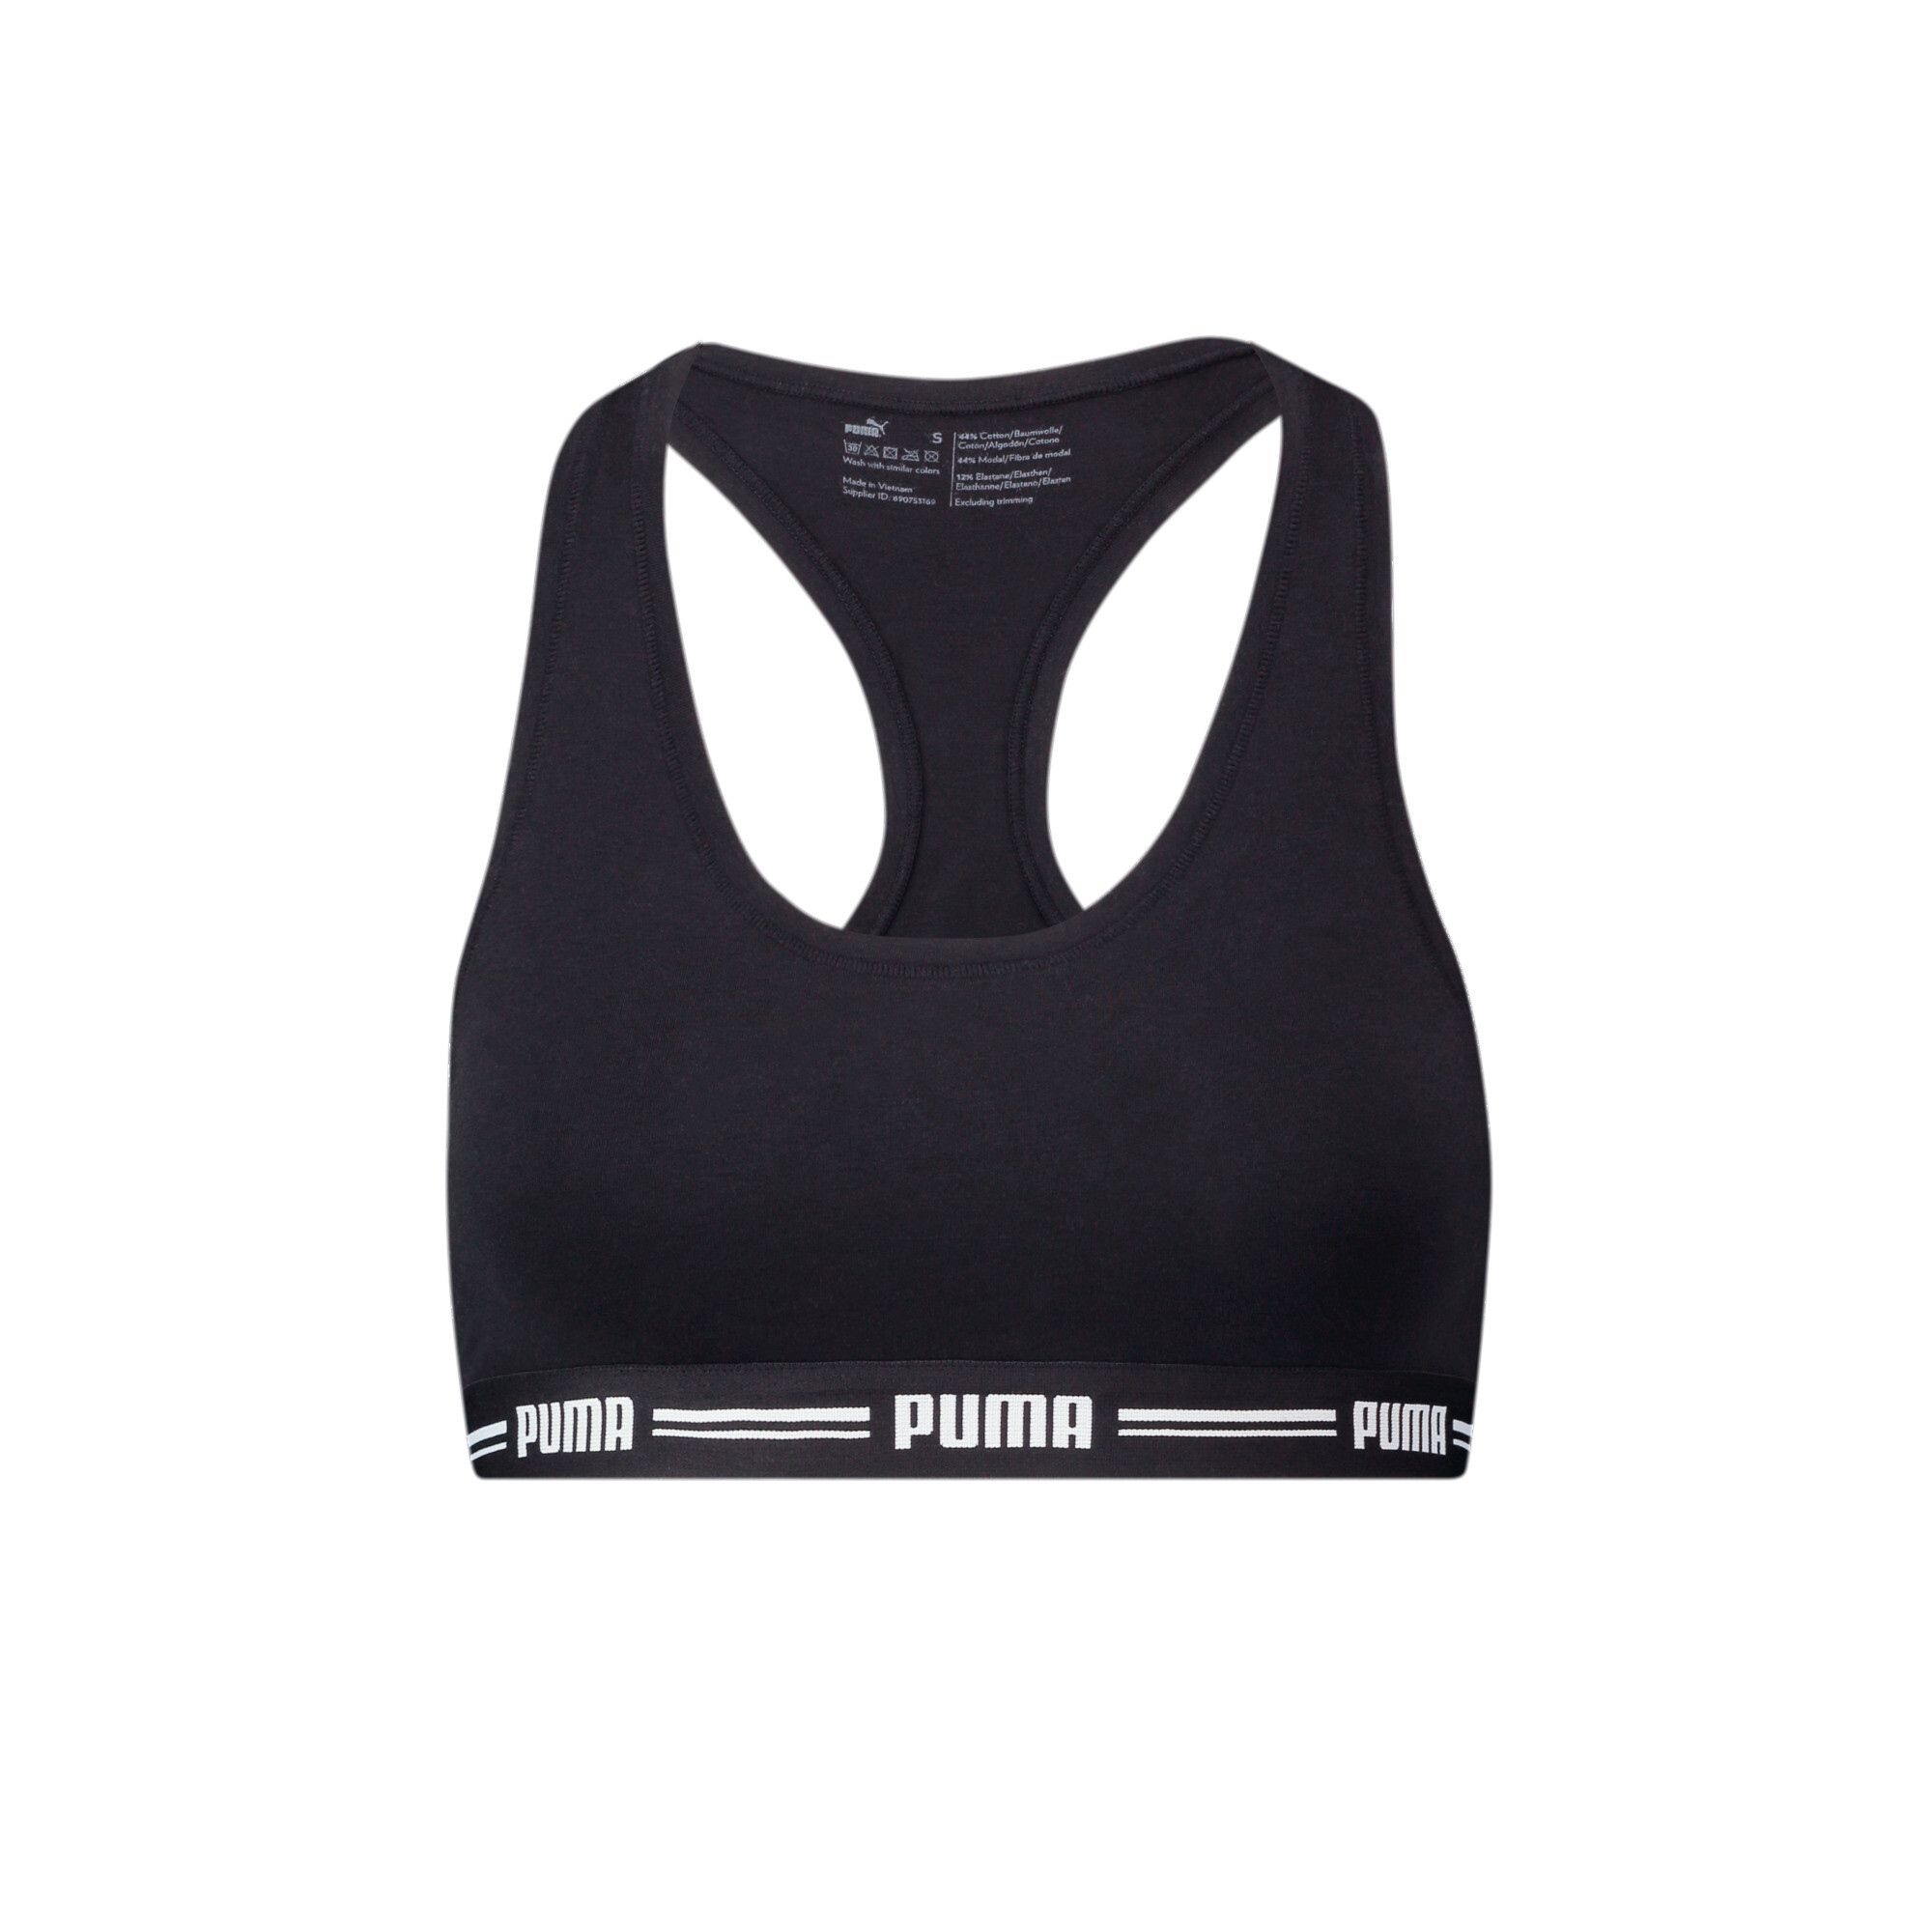 Women's PUMA Racer Back Top 1 Pack In Black, Size XS